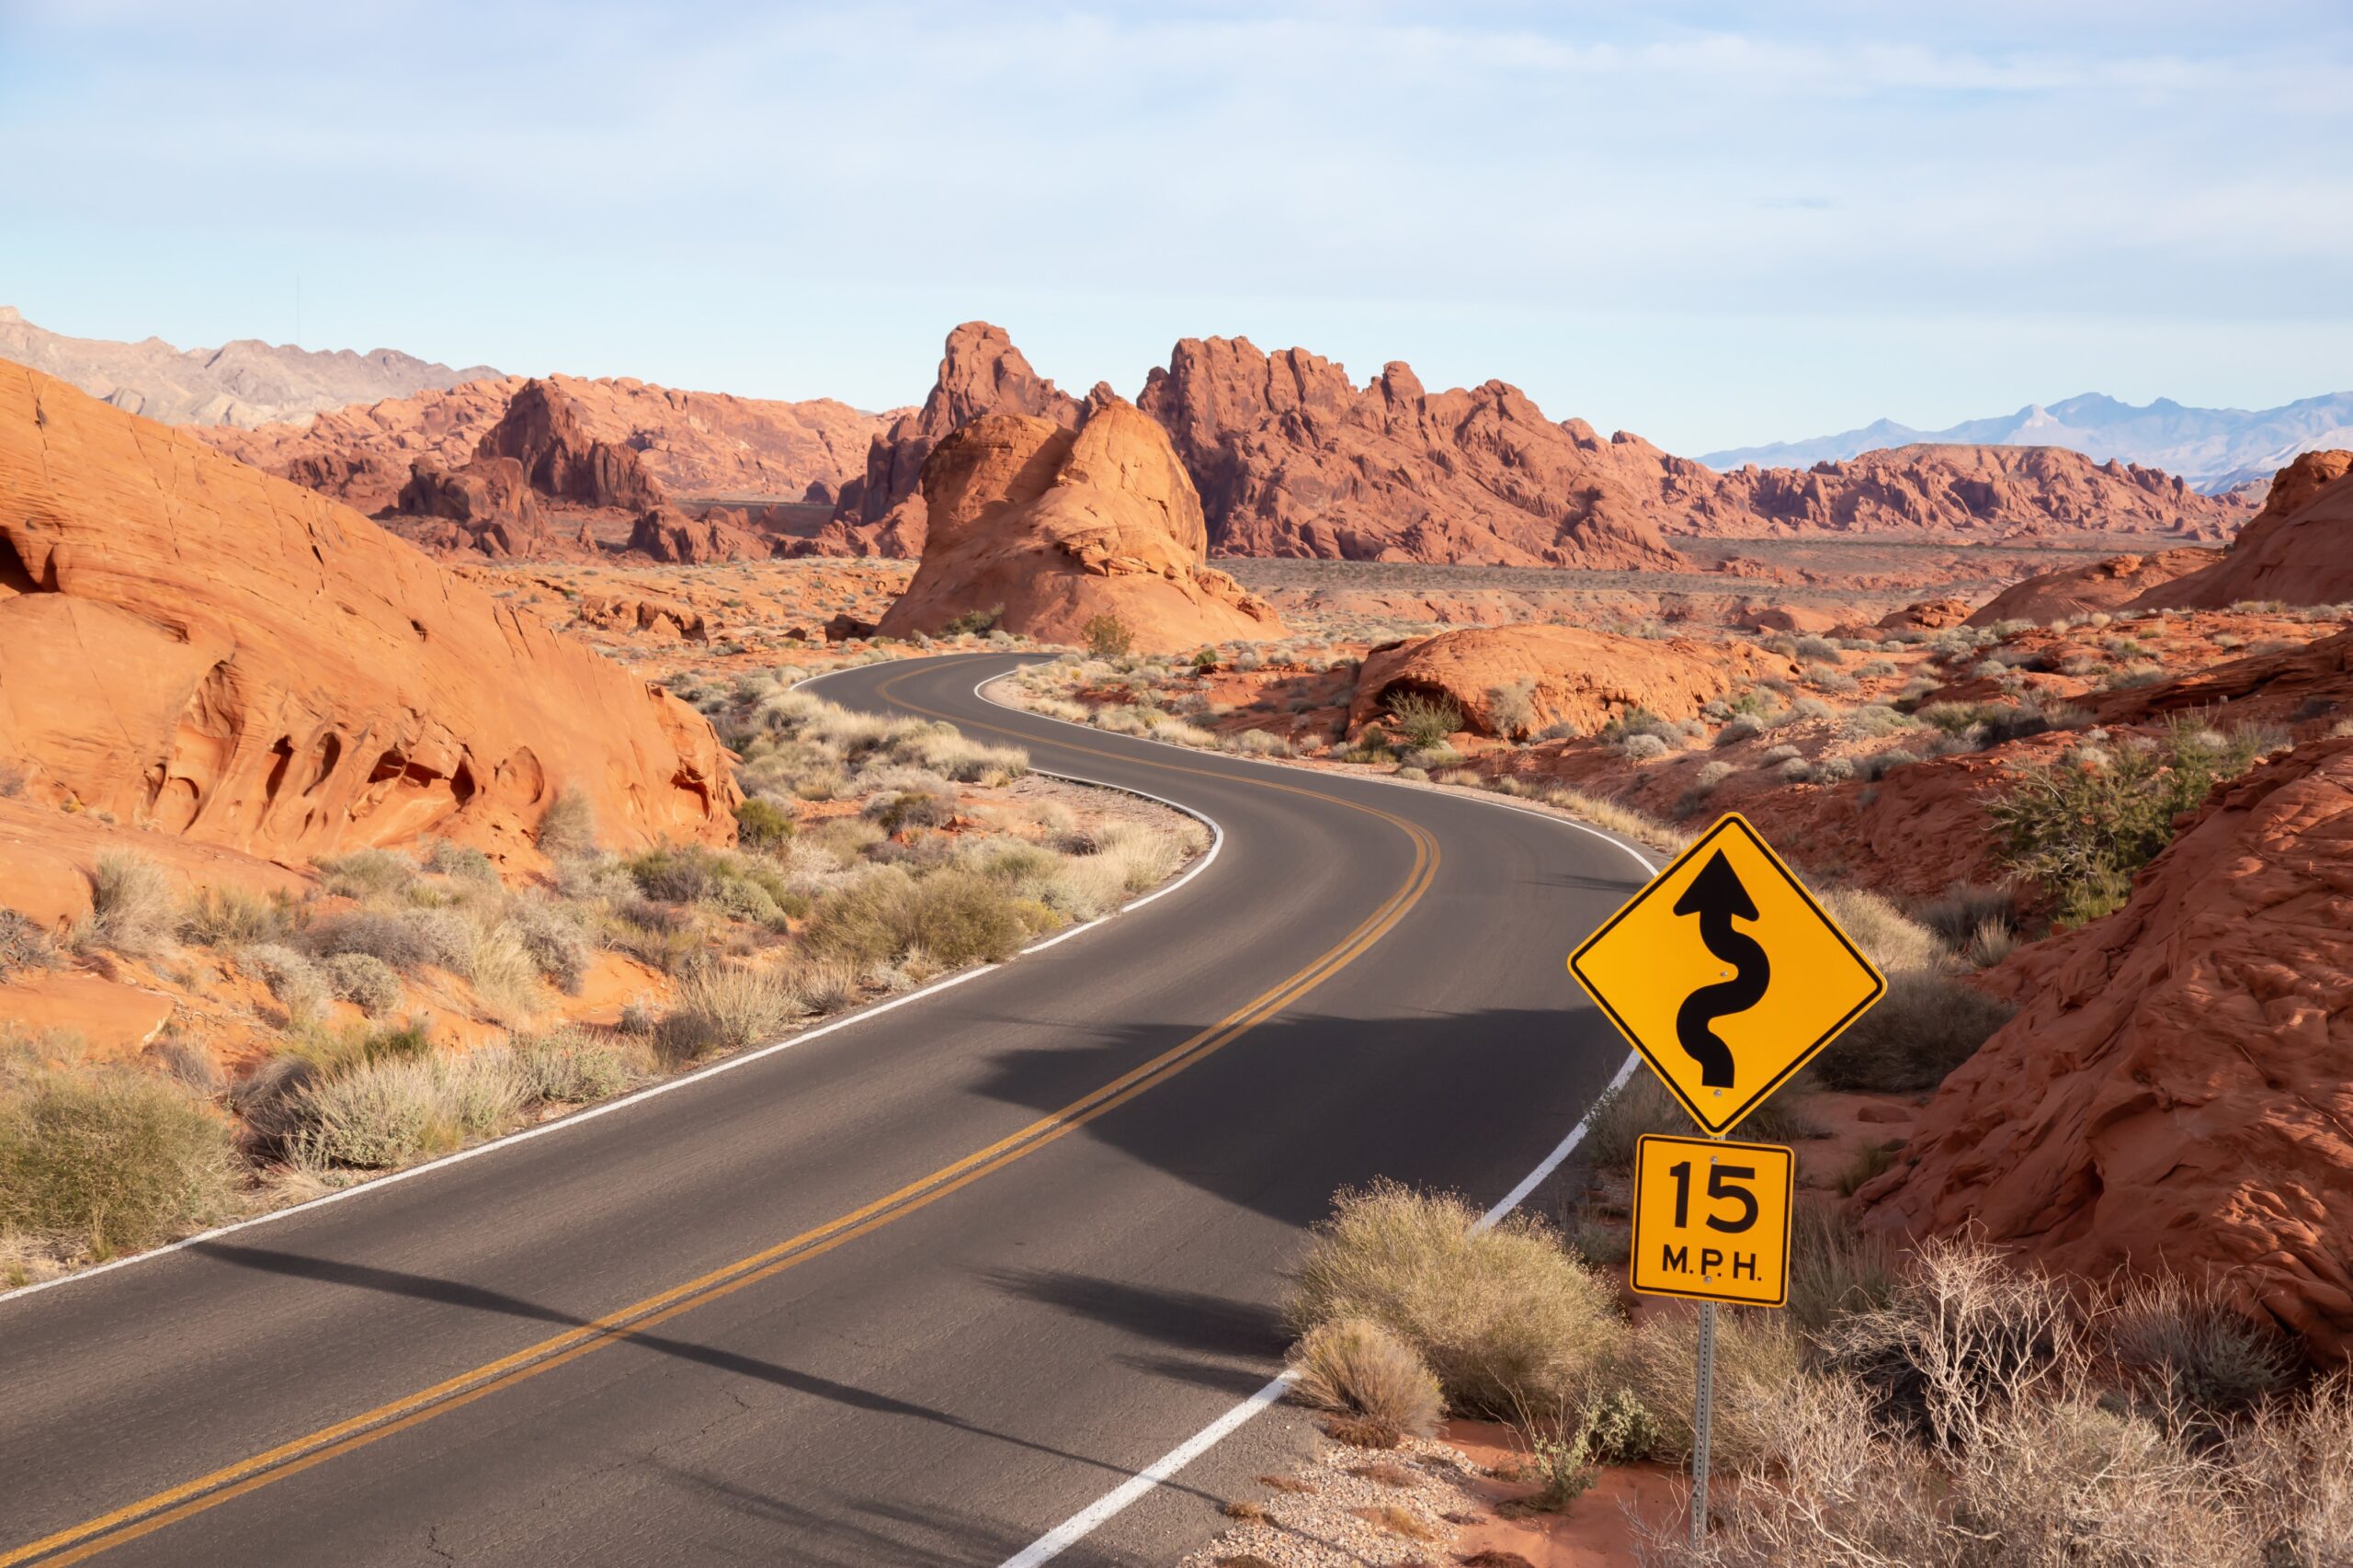 Top 5 Reasons To Take A Road Trip For Mental Health